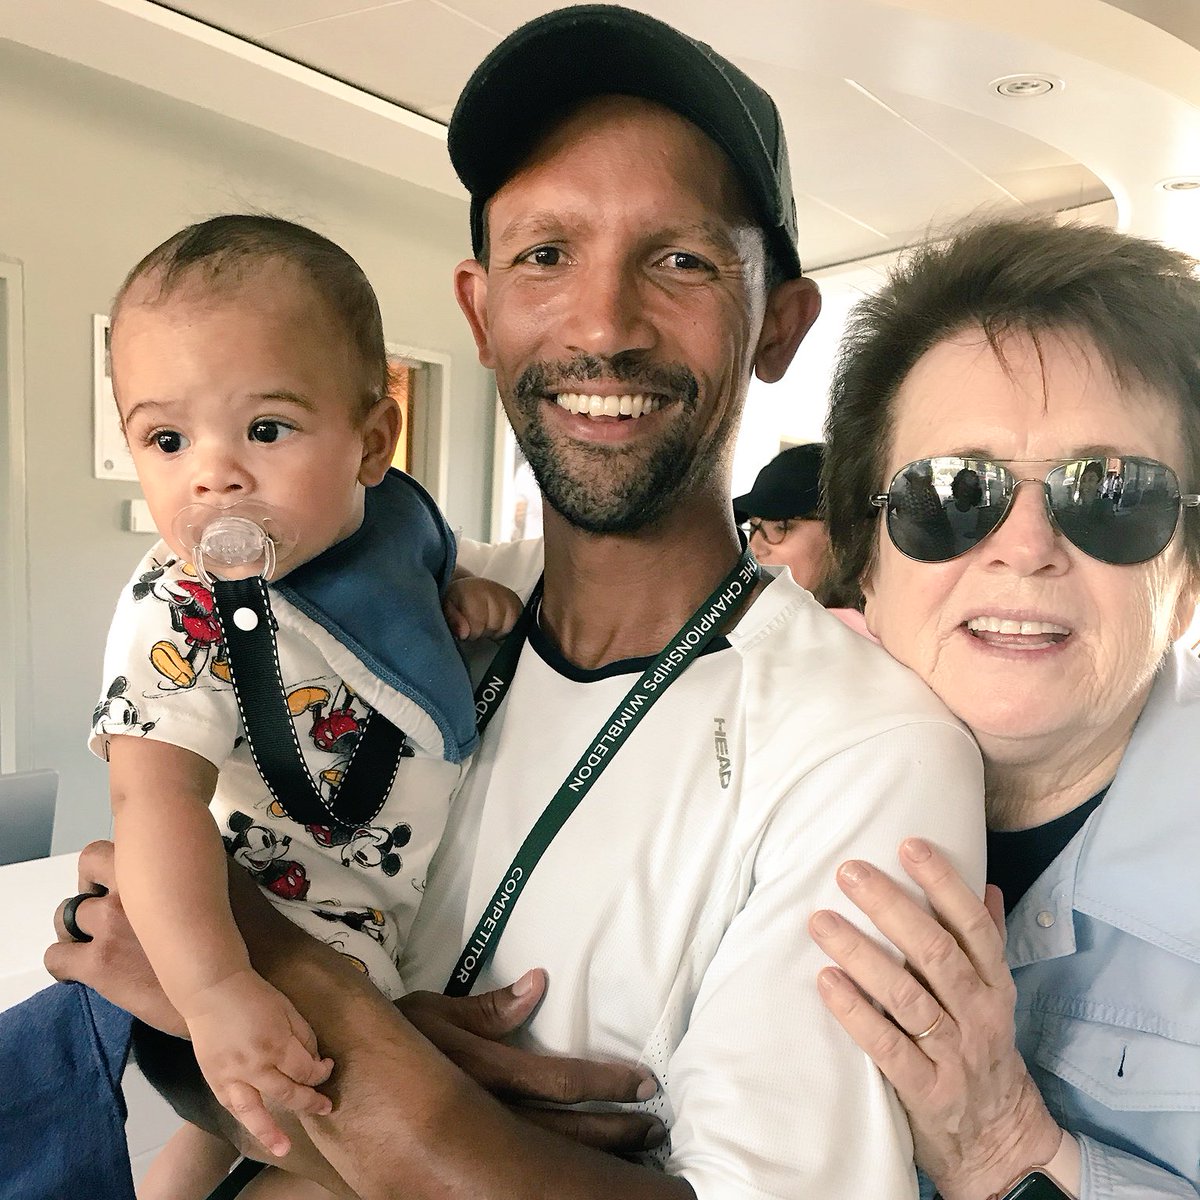 Carter Klaasen is a little ray of sunshine. Congratulations to his dad, @ravenklaasen, and Mike Venus on reaching the @Wimbledon men’s doubles finals. #Wimbledon